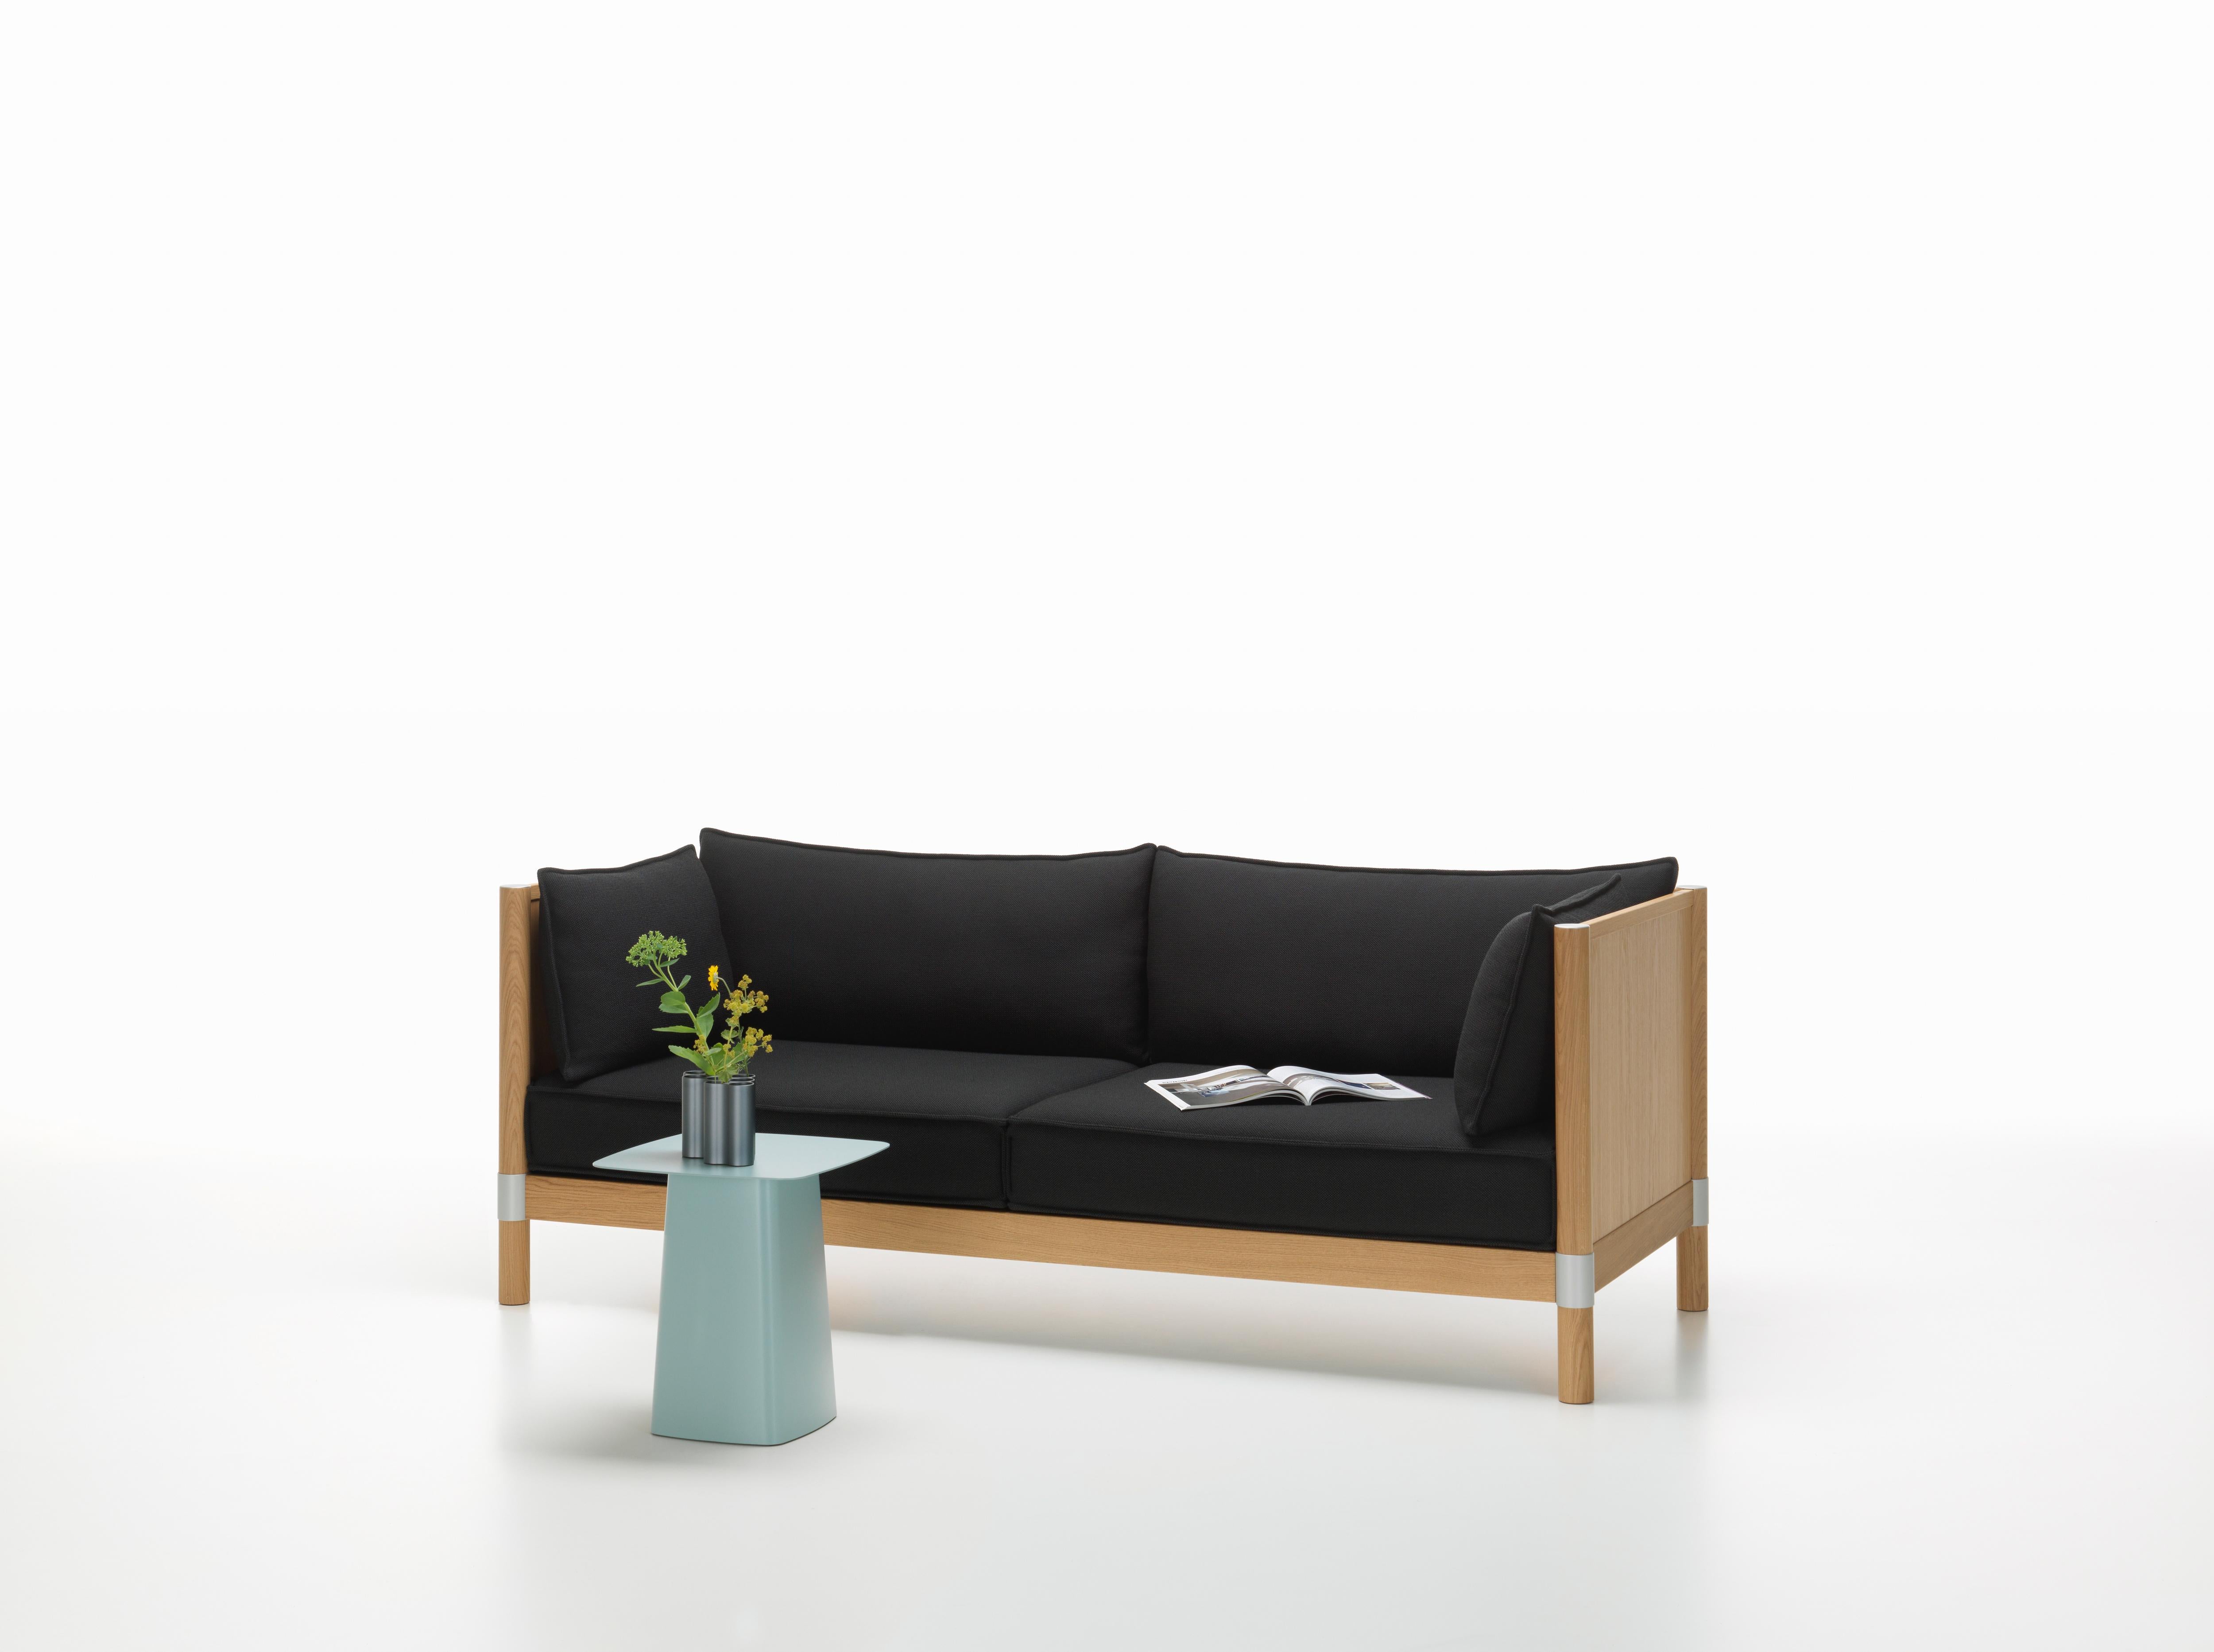 Vitra Cyl Sofa Wood in Black & Anthracite Credo by Ronan & Erwan Bouroullec In New Condition For Sale In New York, NY